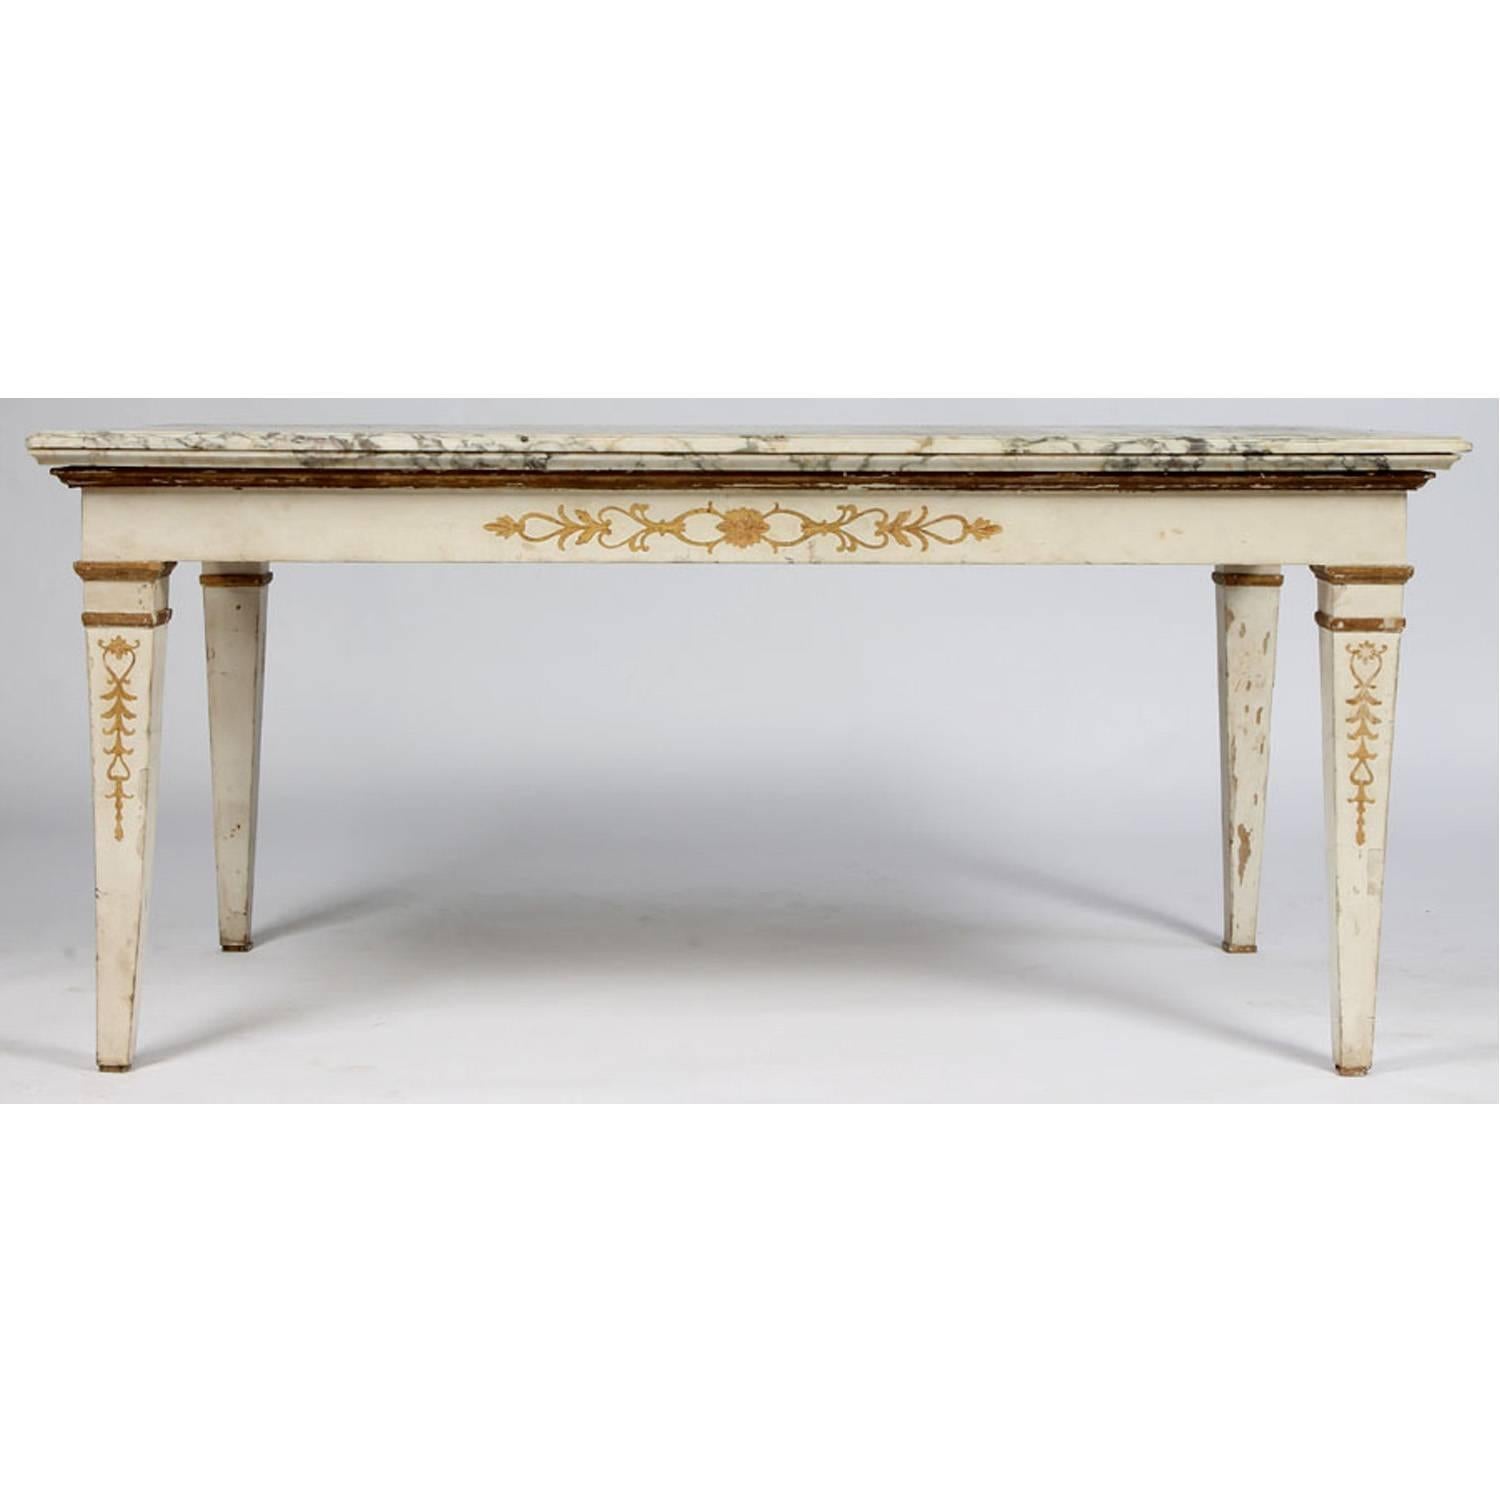 Includes a double thick white marble top.  Some gold and white paint missing.

Architect, Sandy Littman of Duesenberg LTD.  and The American Glass Light Company have been making beautiful objects and collecting gorgeous antiques for nearly 40 years.